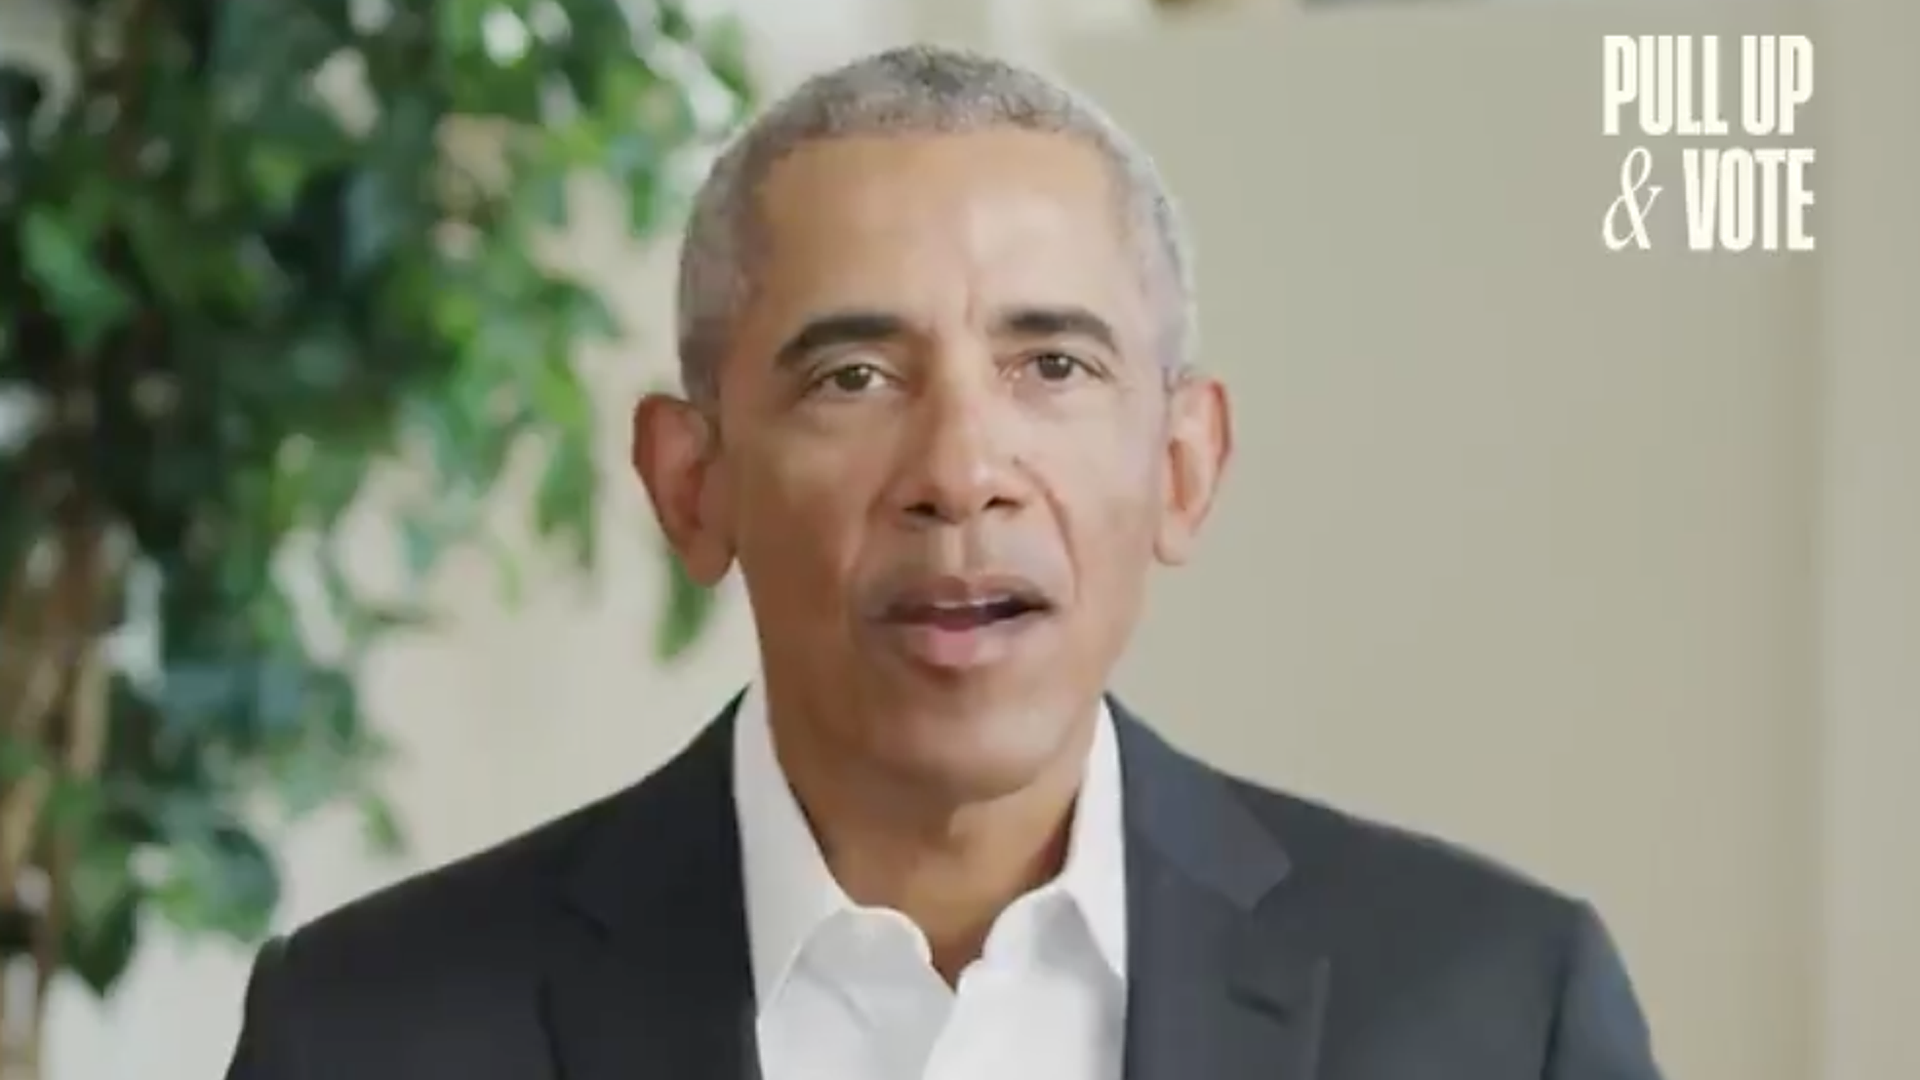 A screenshot of former President Barack Obama from the Pull Up & Vote Party.